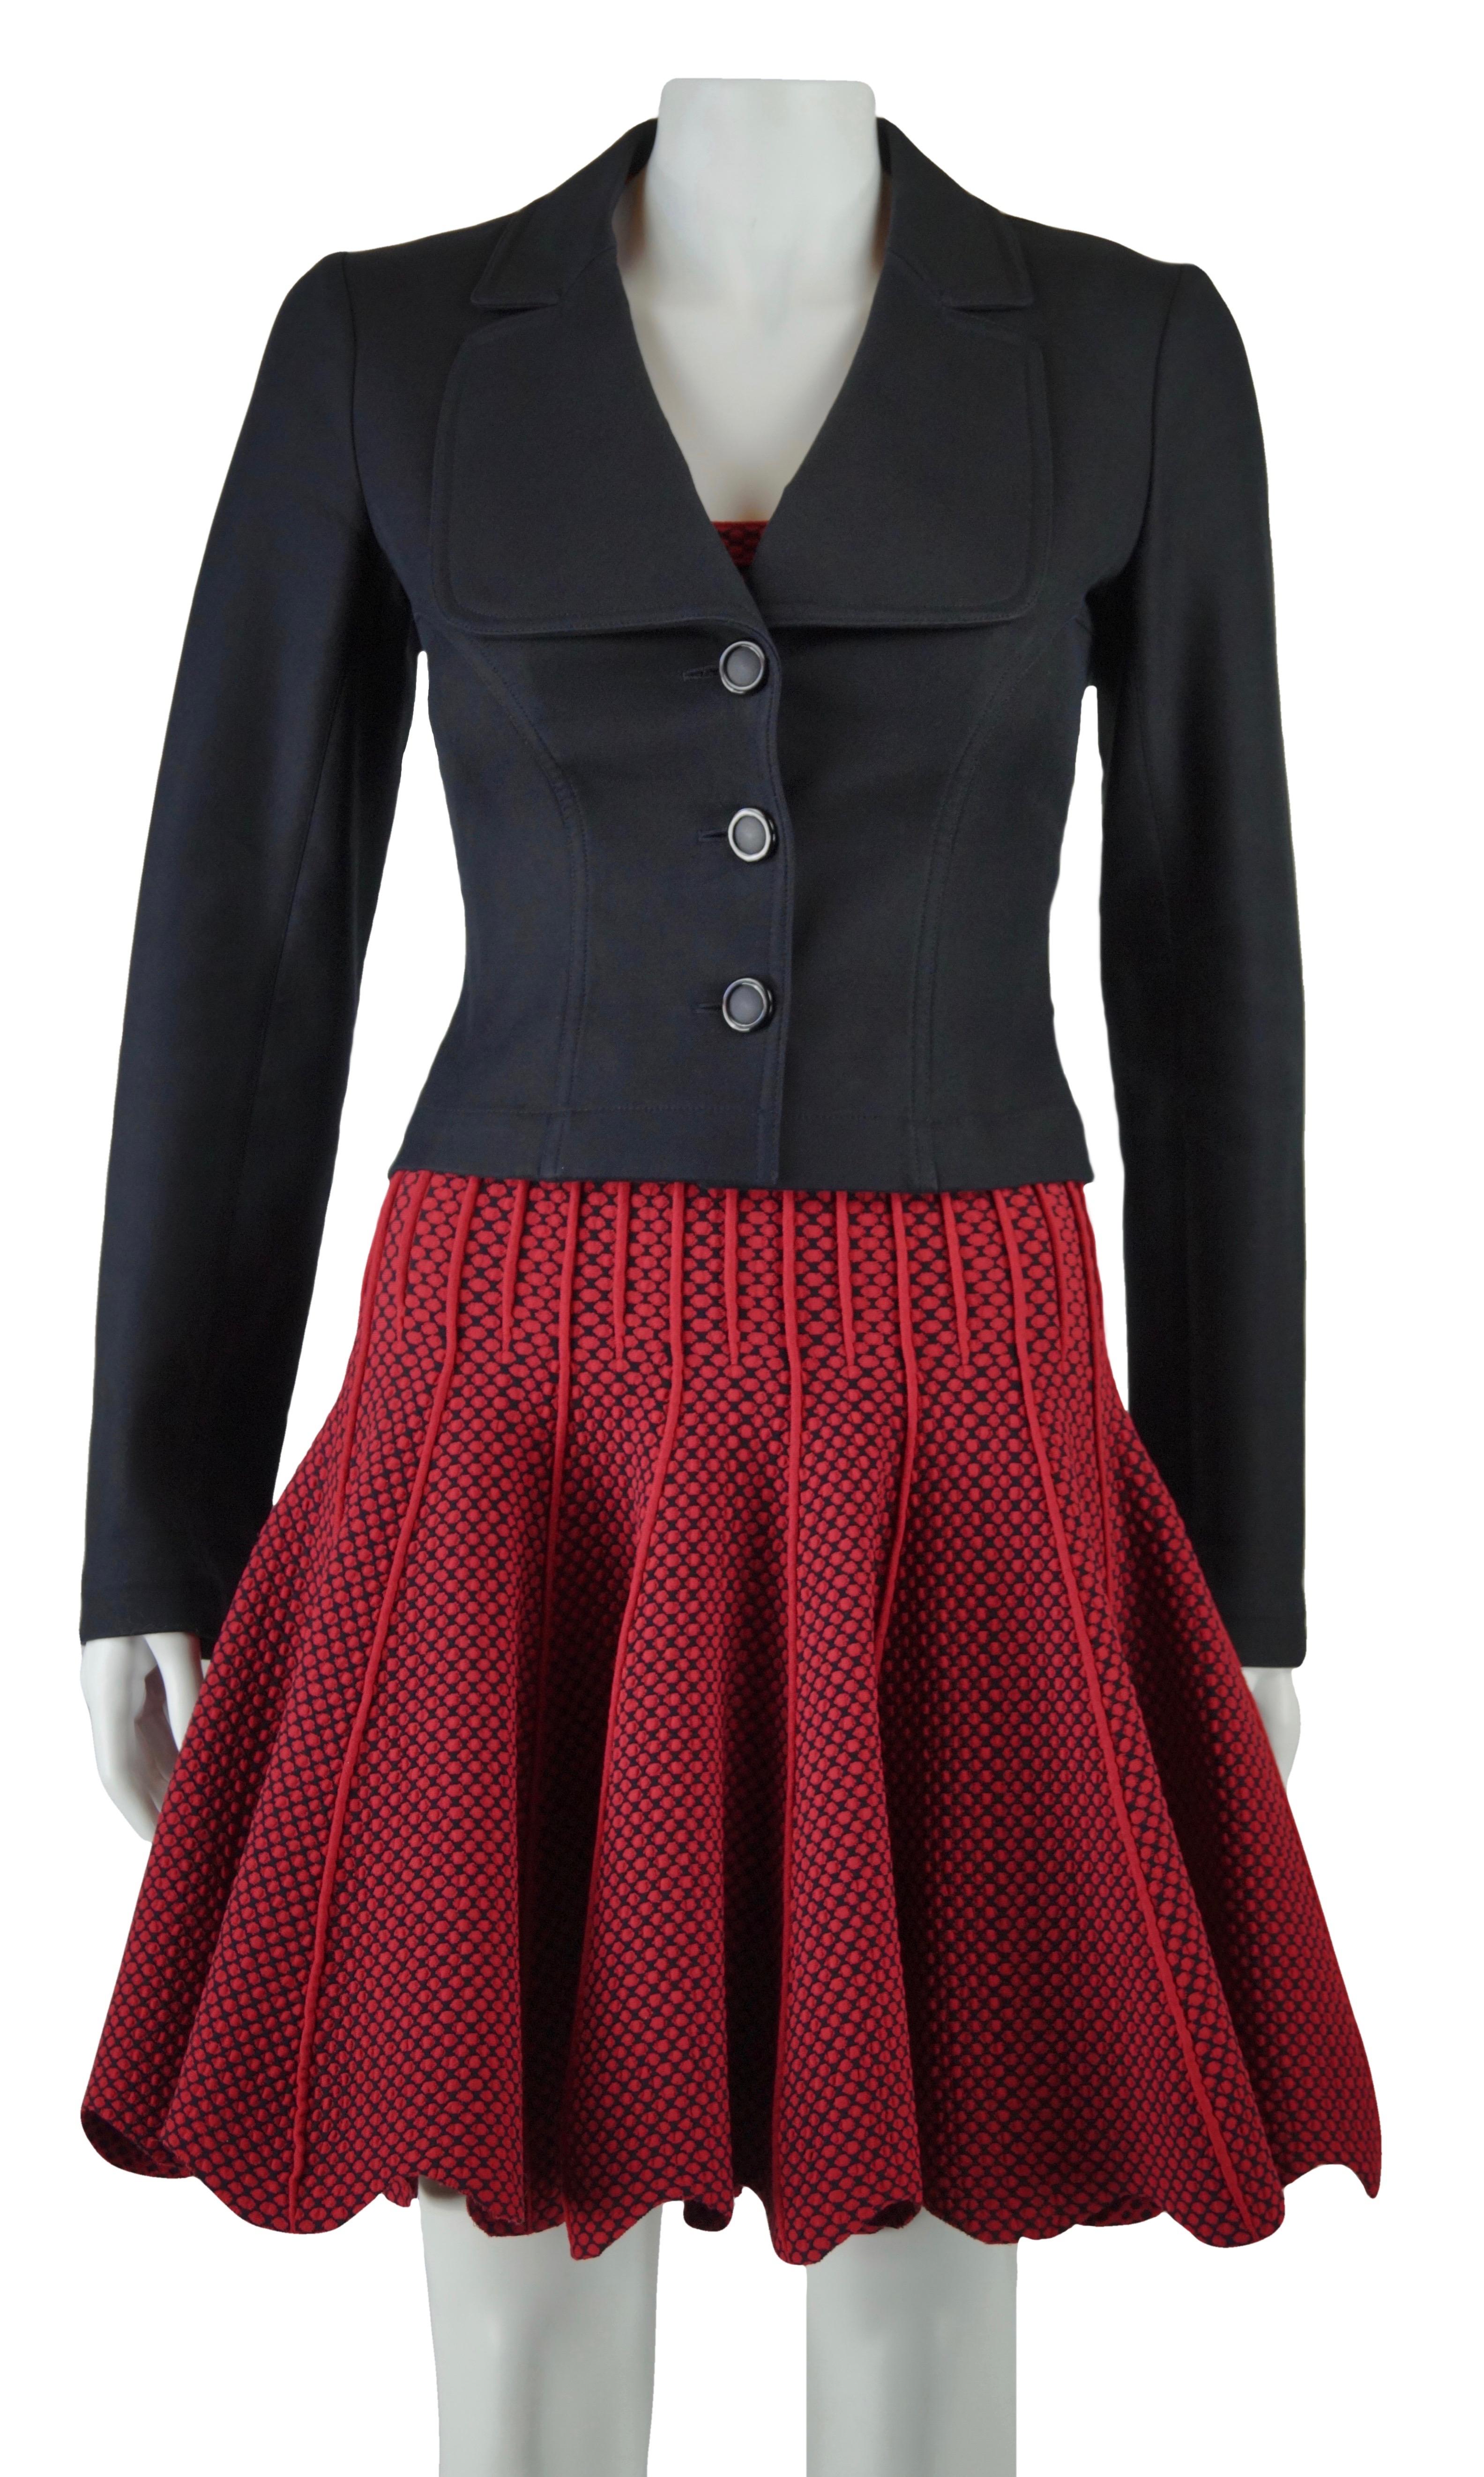 ALAÏA PARIS
dress and jacket
Red and black dress with vertical ribbing, scalloped hem - sleeveless
size FR 36
made in Italy
70% viscose - 20% polyamide - 6% polyester - 4% rubber
70% viscose - 20% nylon - 6% polyester - 4% elastodien
Flat